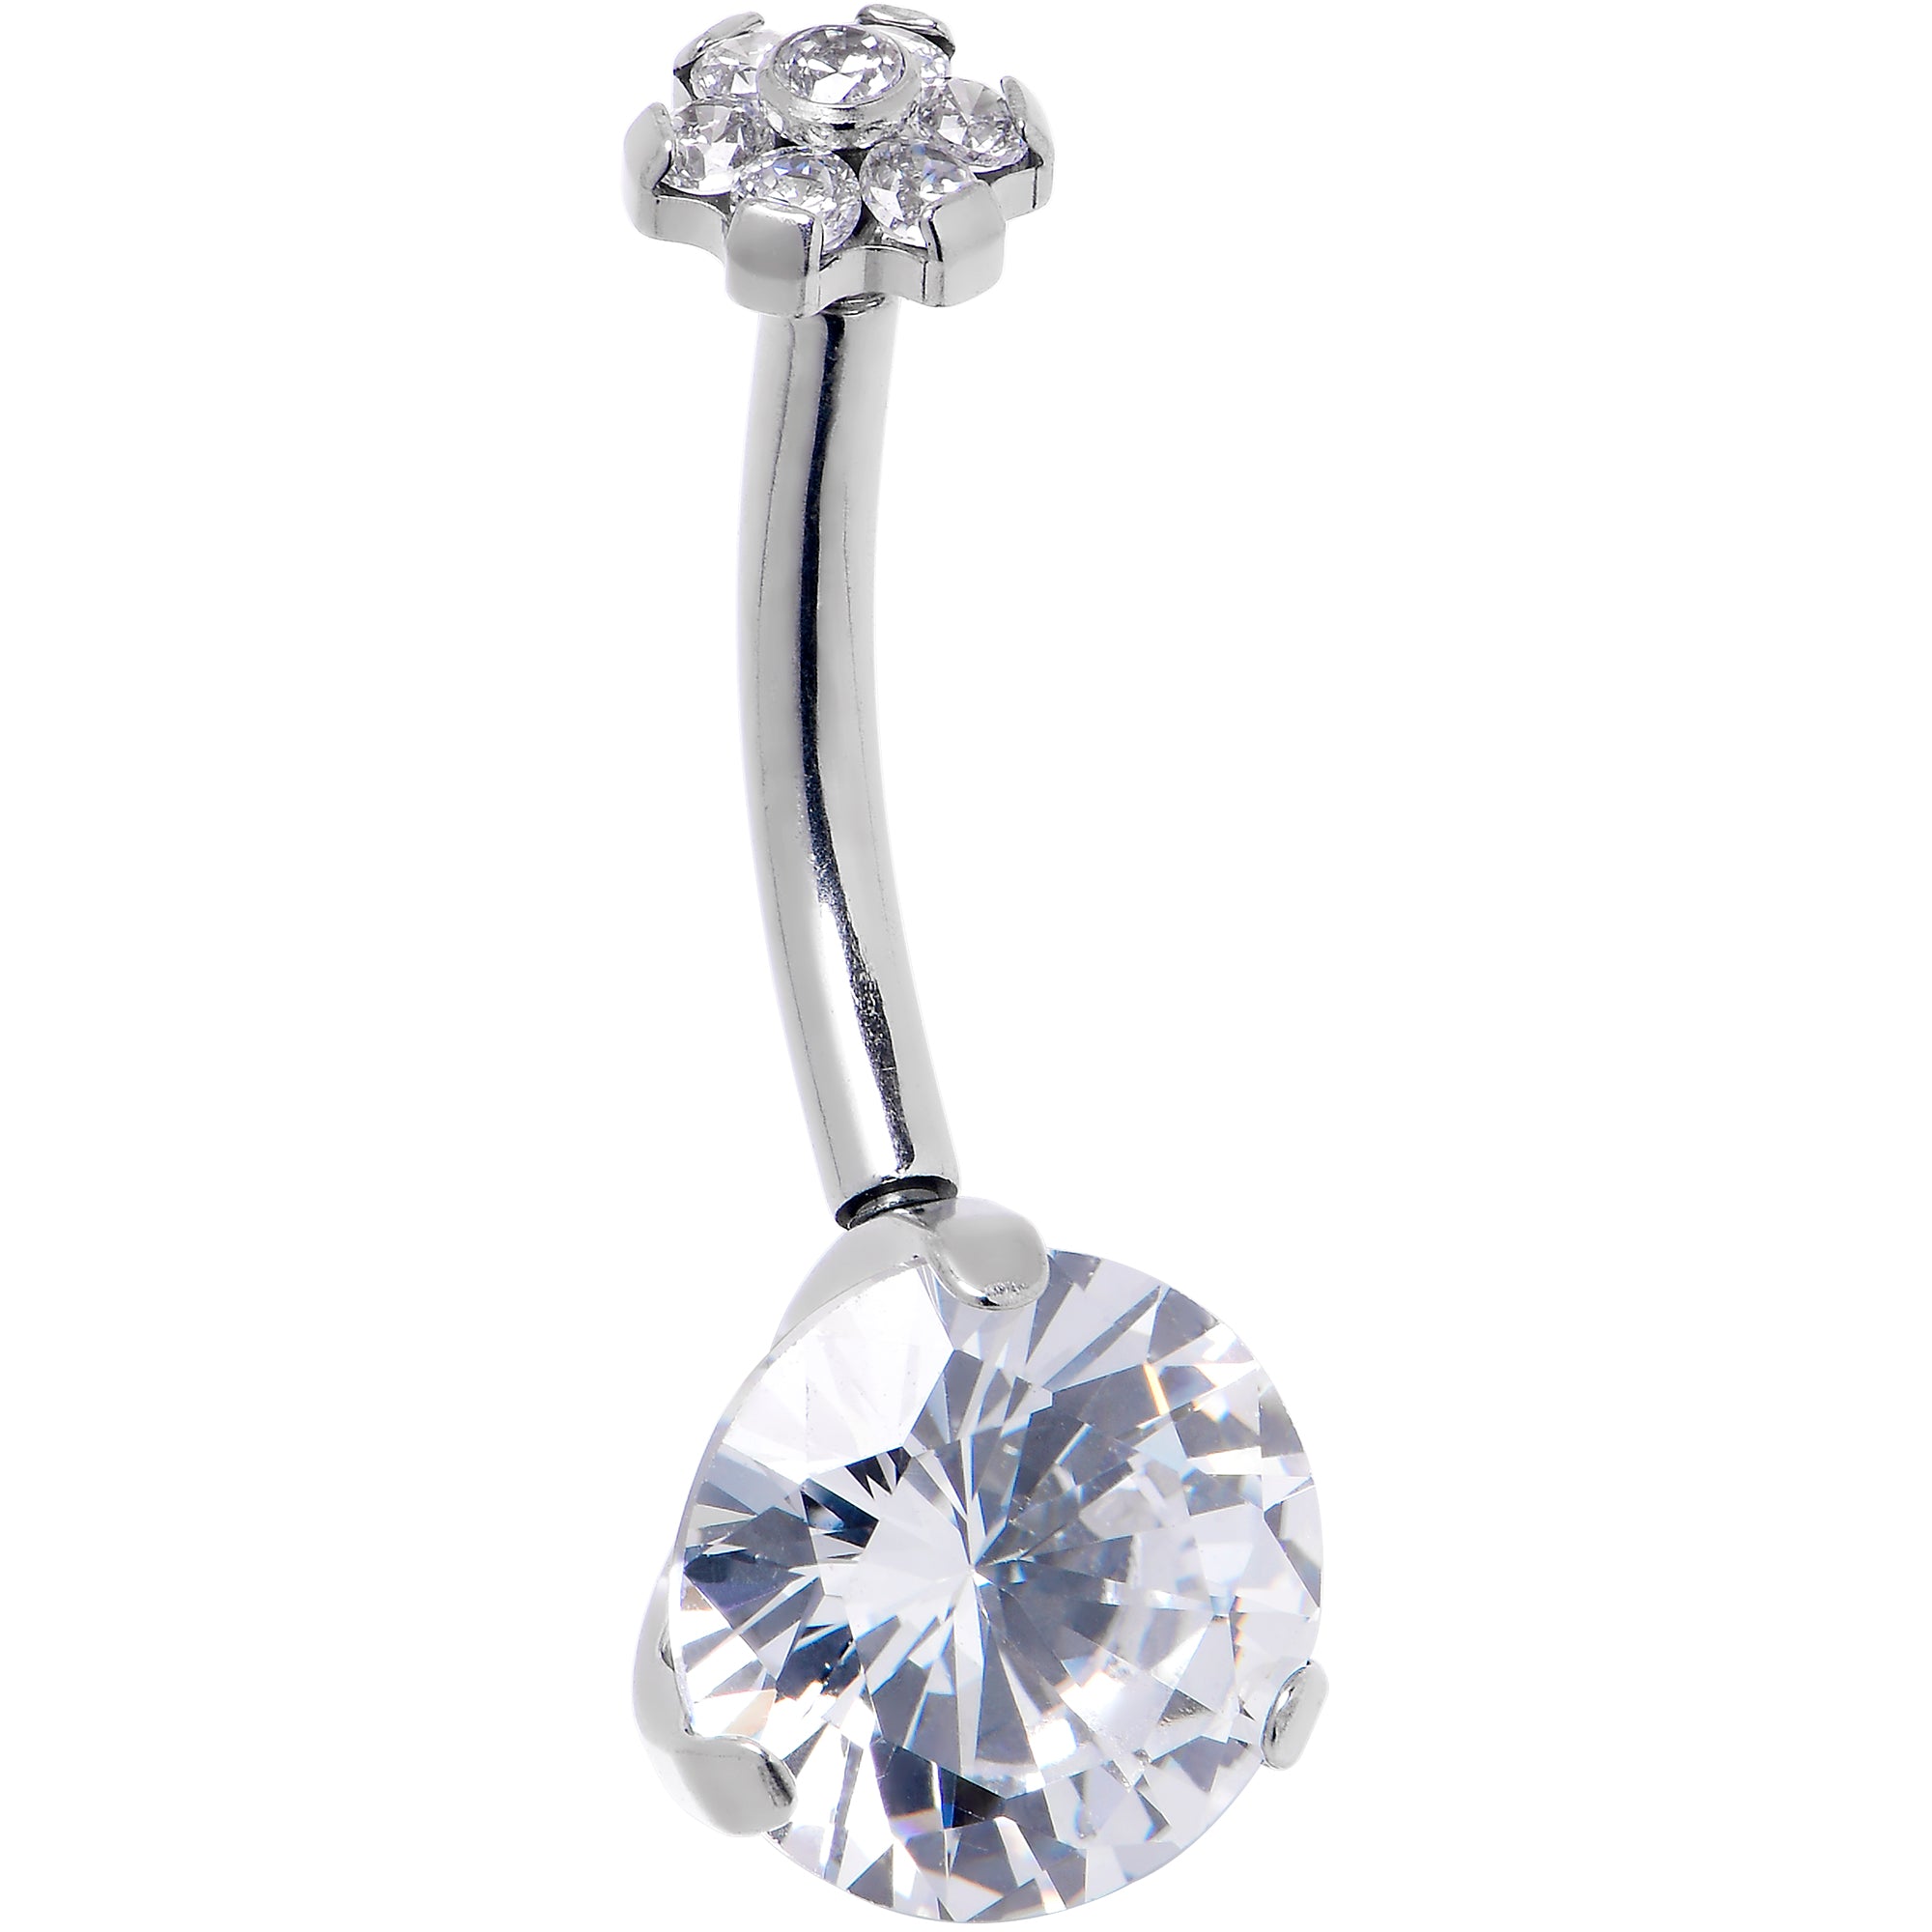 Clear CZ Gem ASTM F-136 Implant Grade Titanium Threadless Double Mount Belly Ring